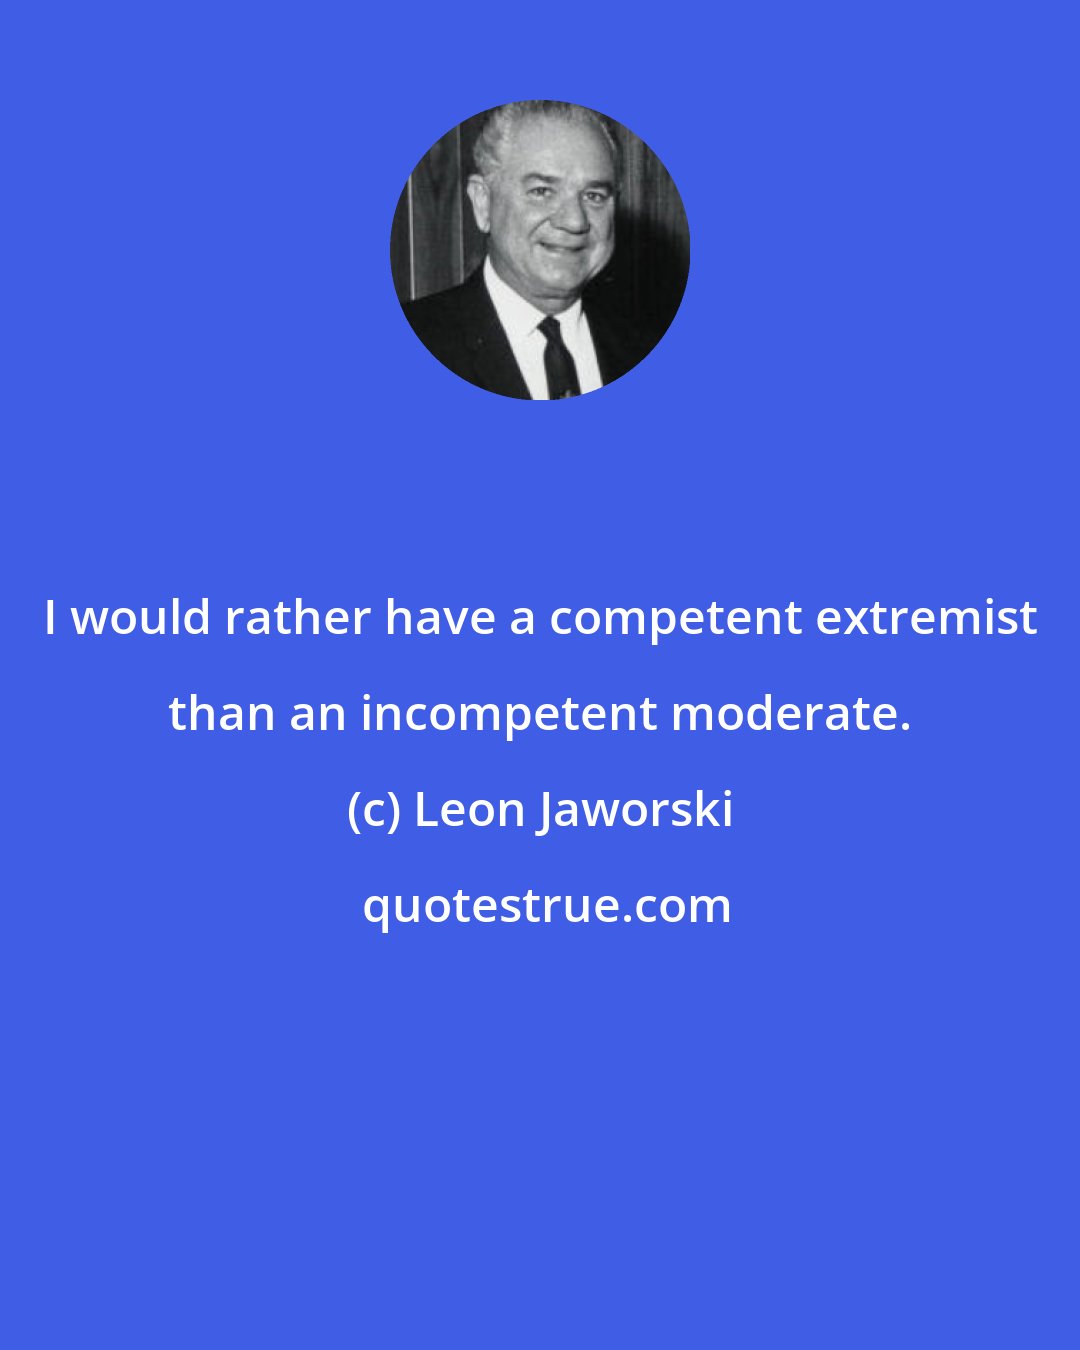 Leon Jaworski: I would rather have a competent extremist than an incompetent moderate.